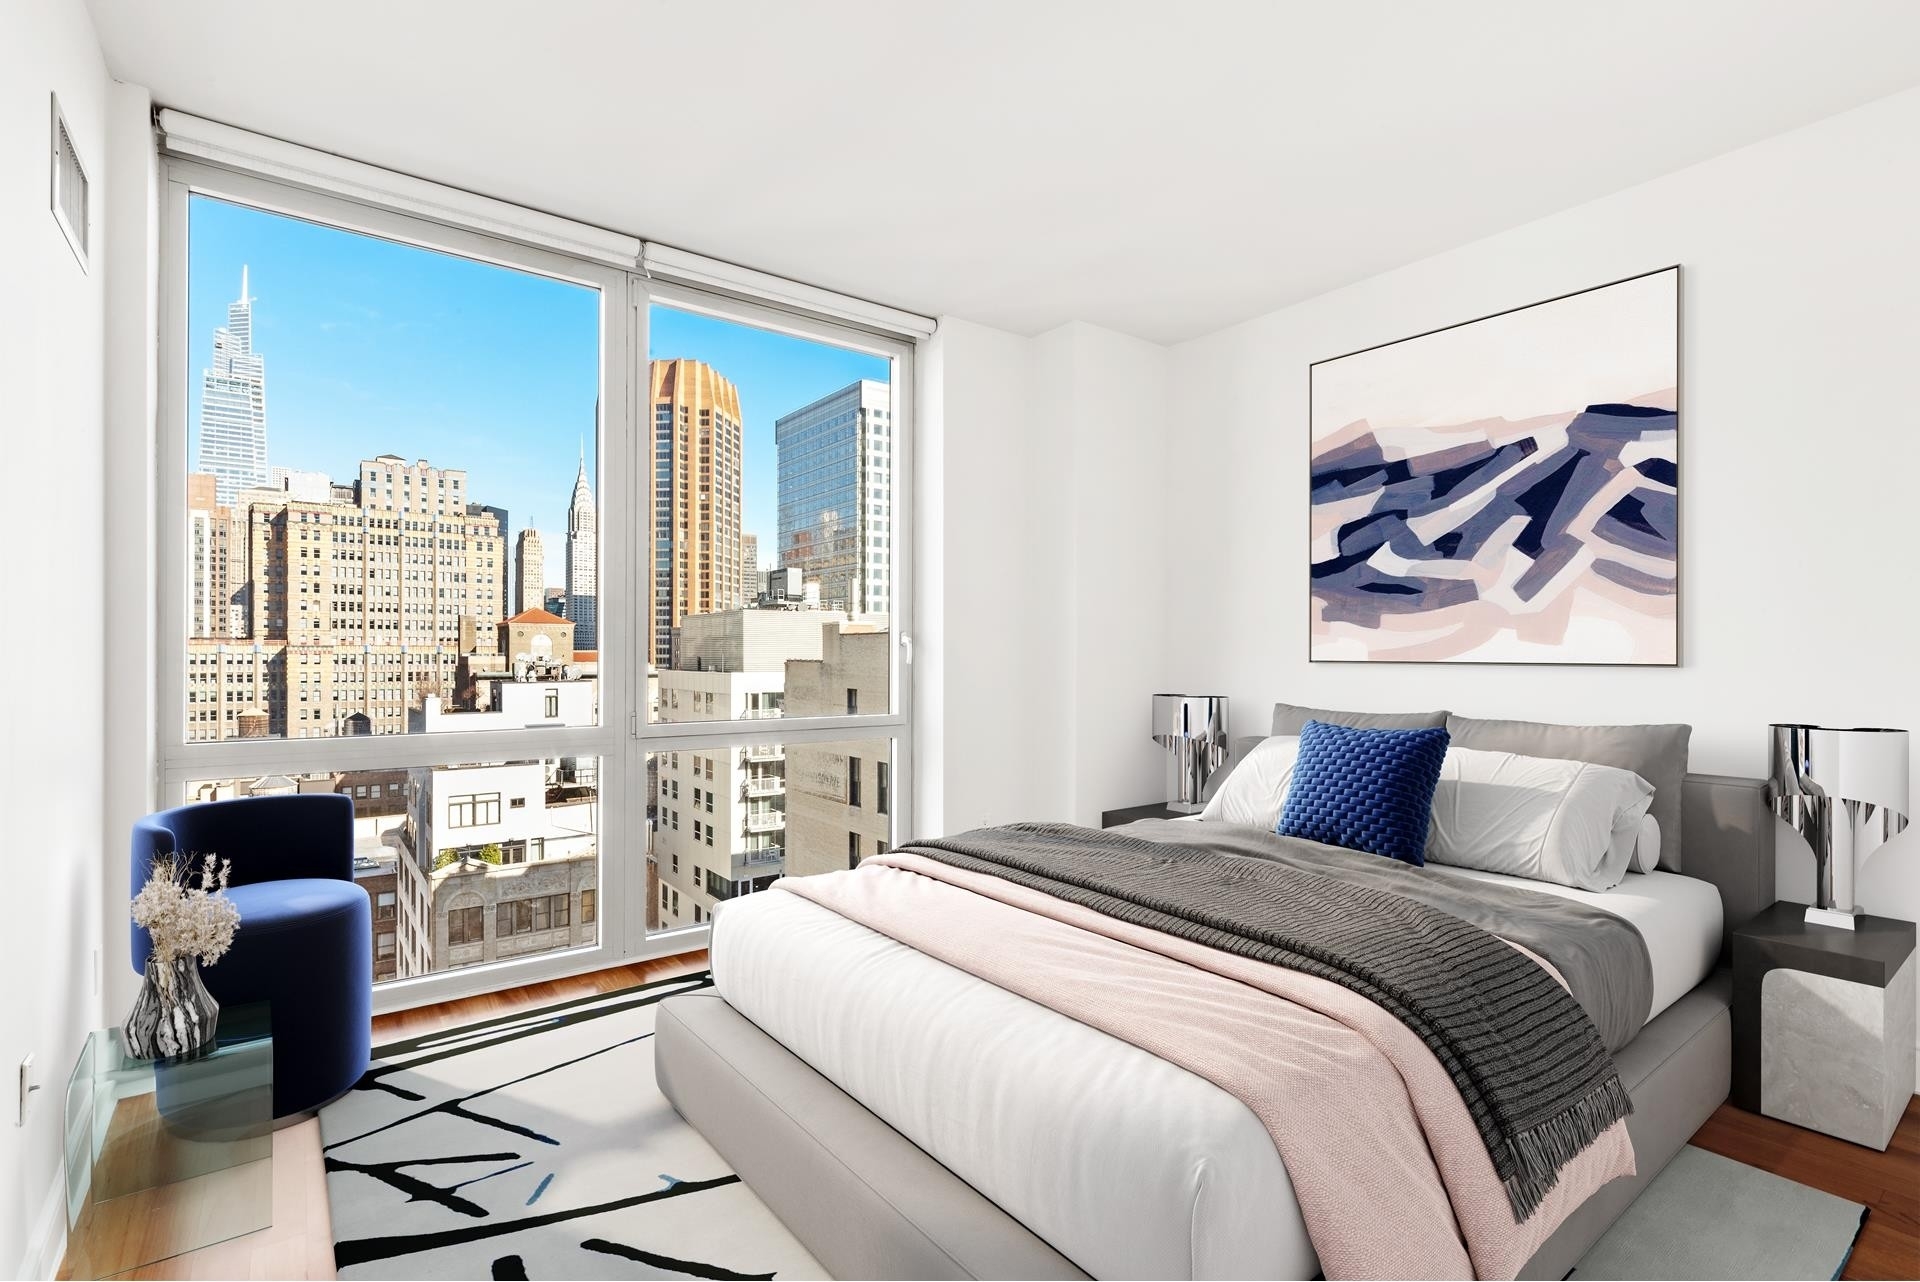 2. Condominiums for Sale at Twenty9th Park Madison, 39 E 29TH ST, 23A NoMad, New York, New York 10016